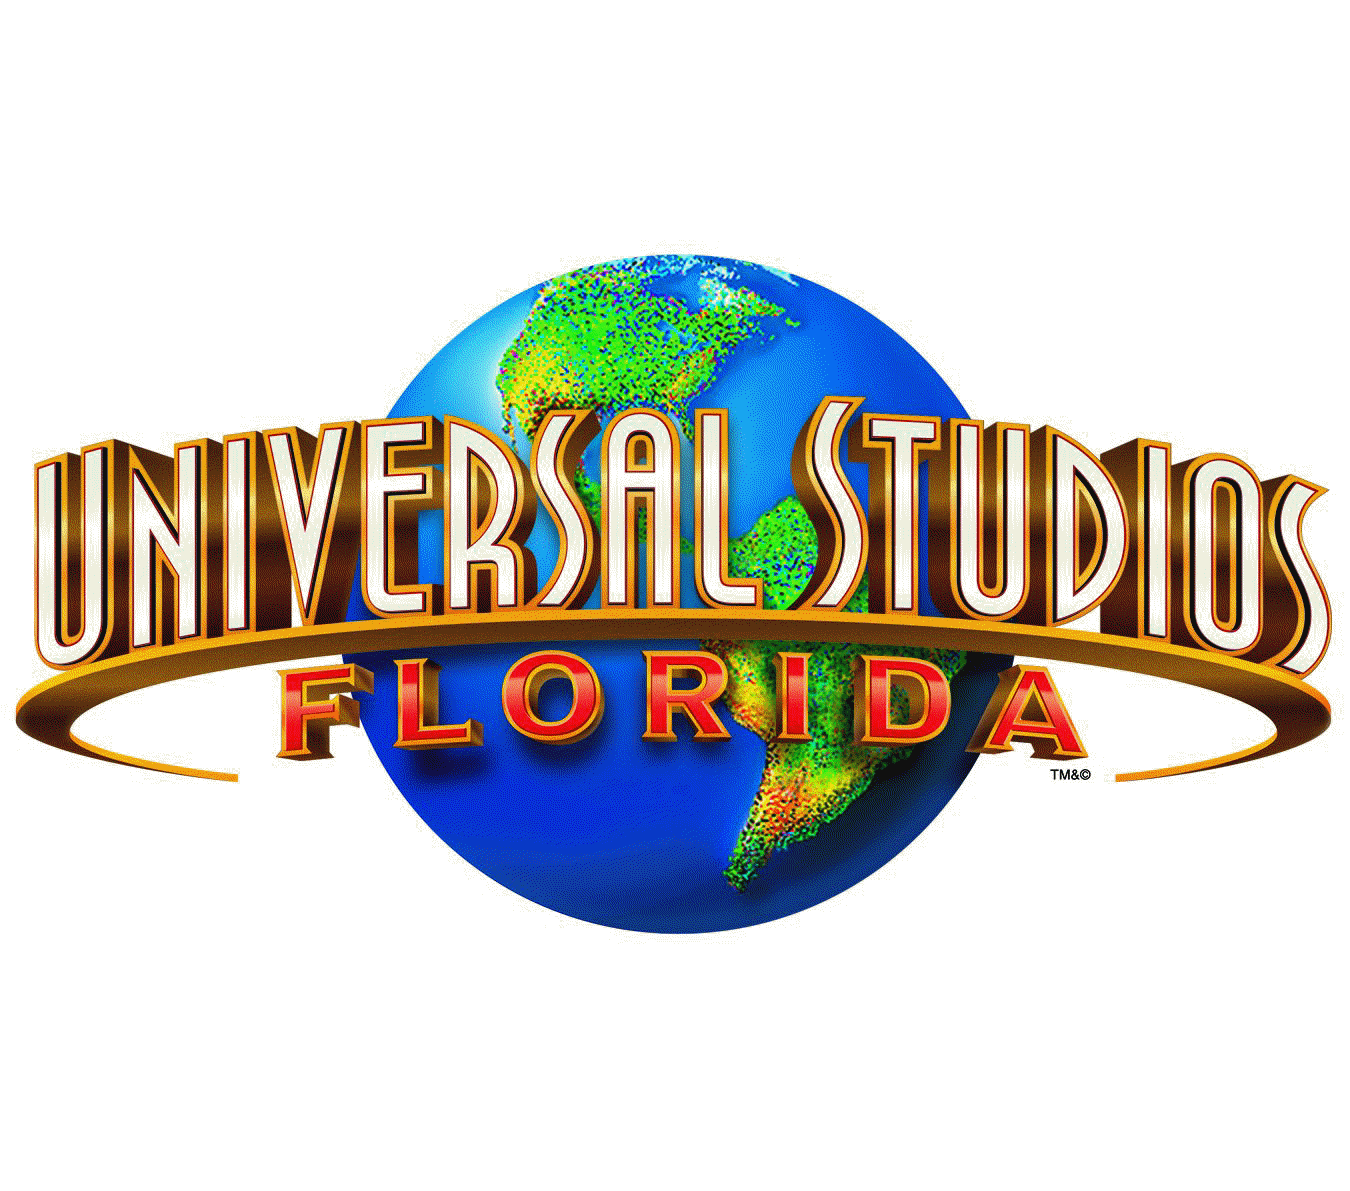 Add a Day at Universal Orlando to Your Disney World Vacation | Chip and